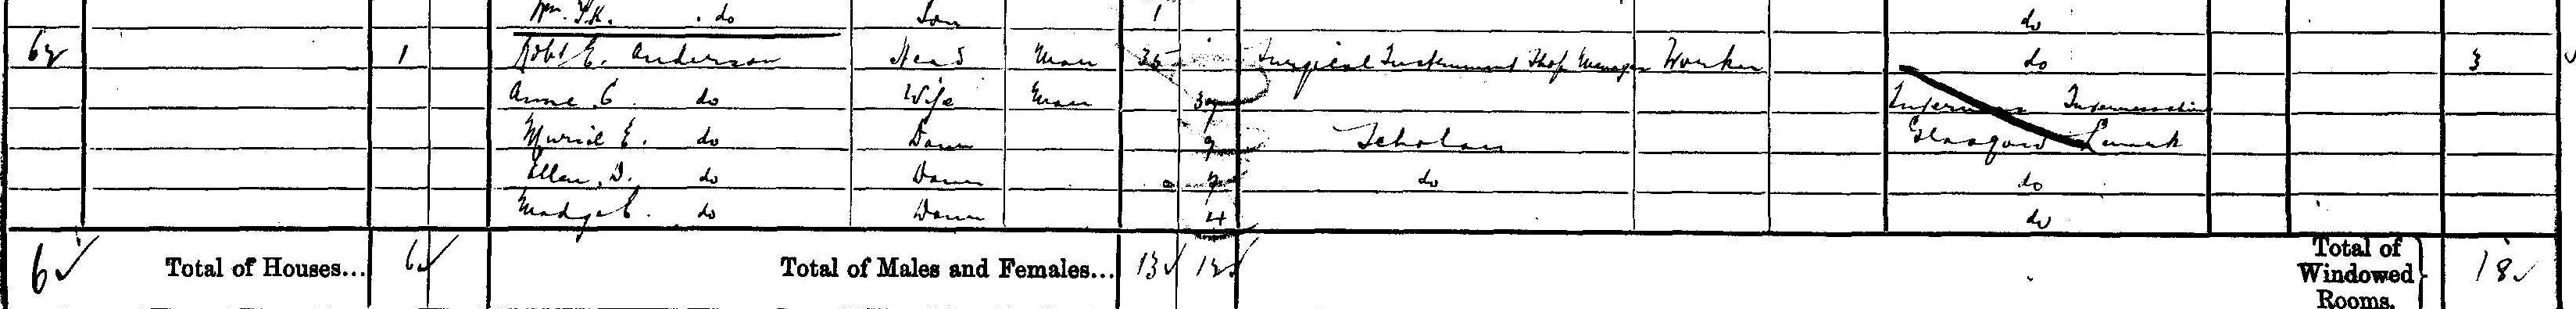 The Anderson family details on the enumeration form for the 1901 census. They are enumerated at 75 Kent Road, Glasgow